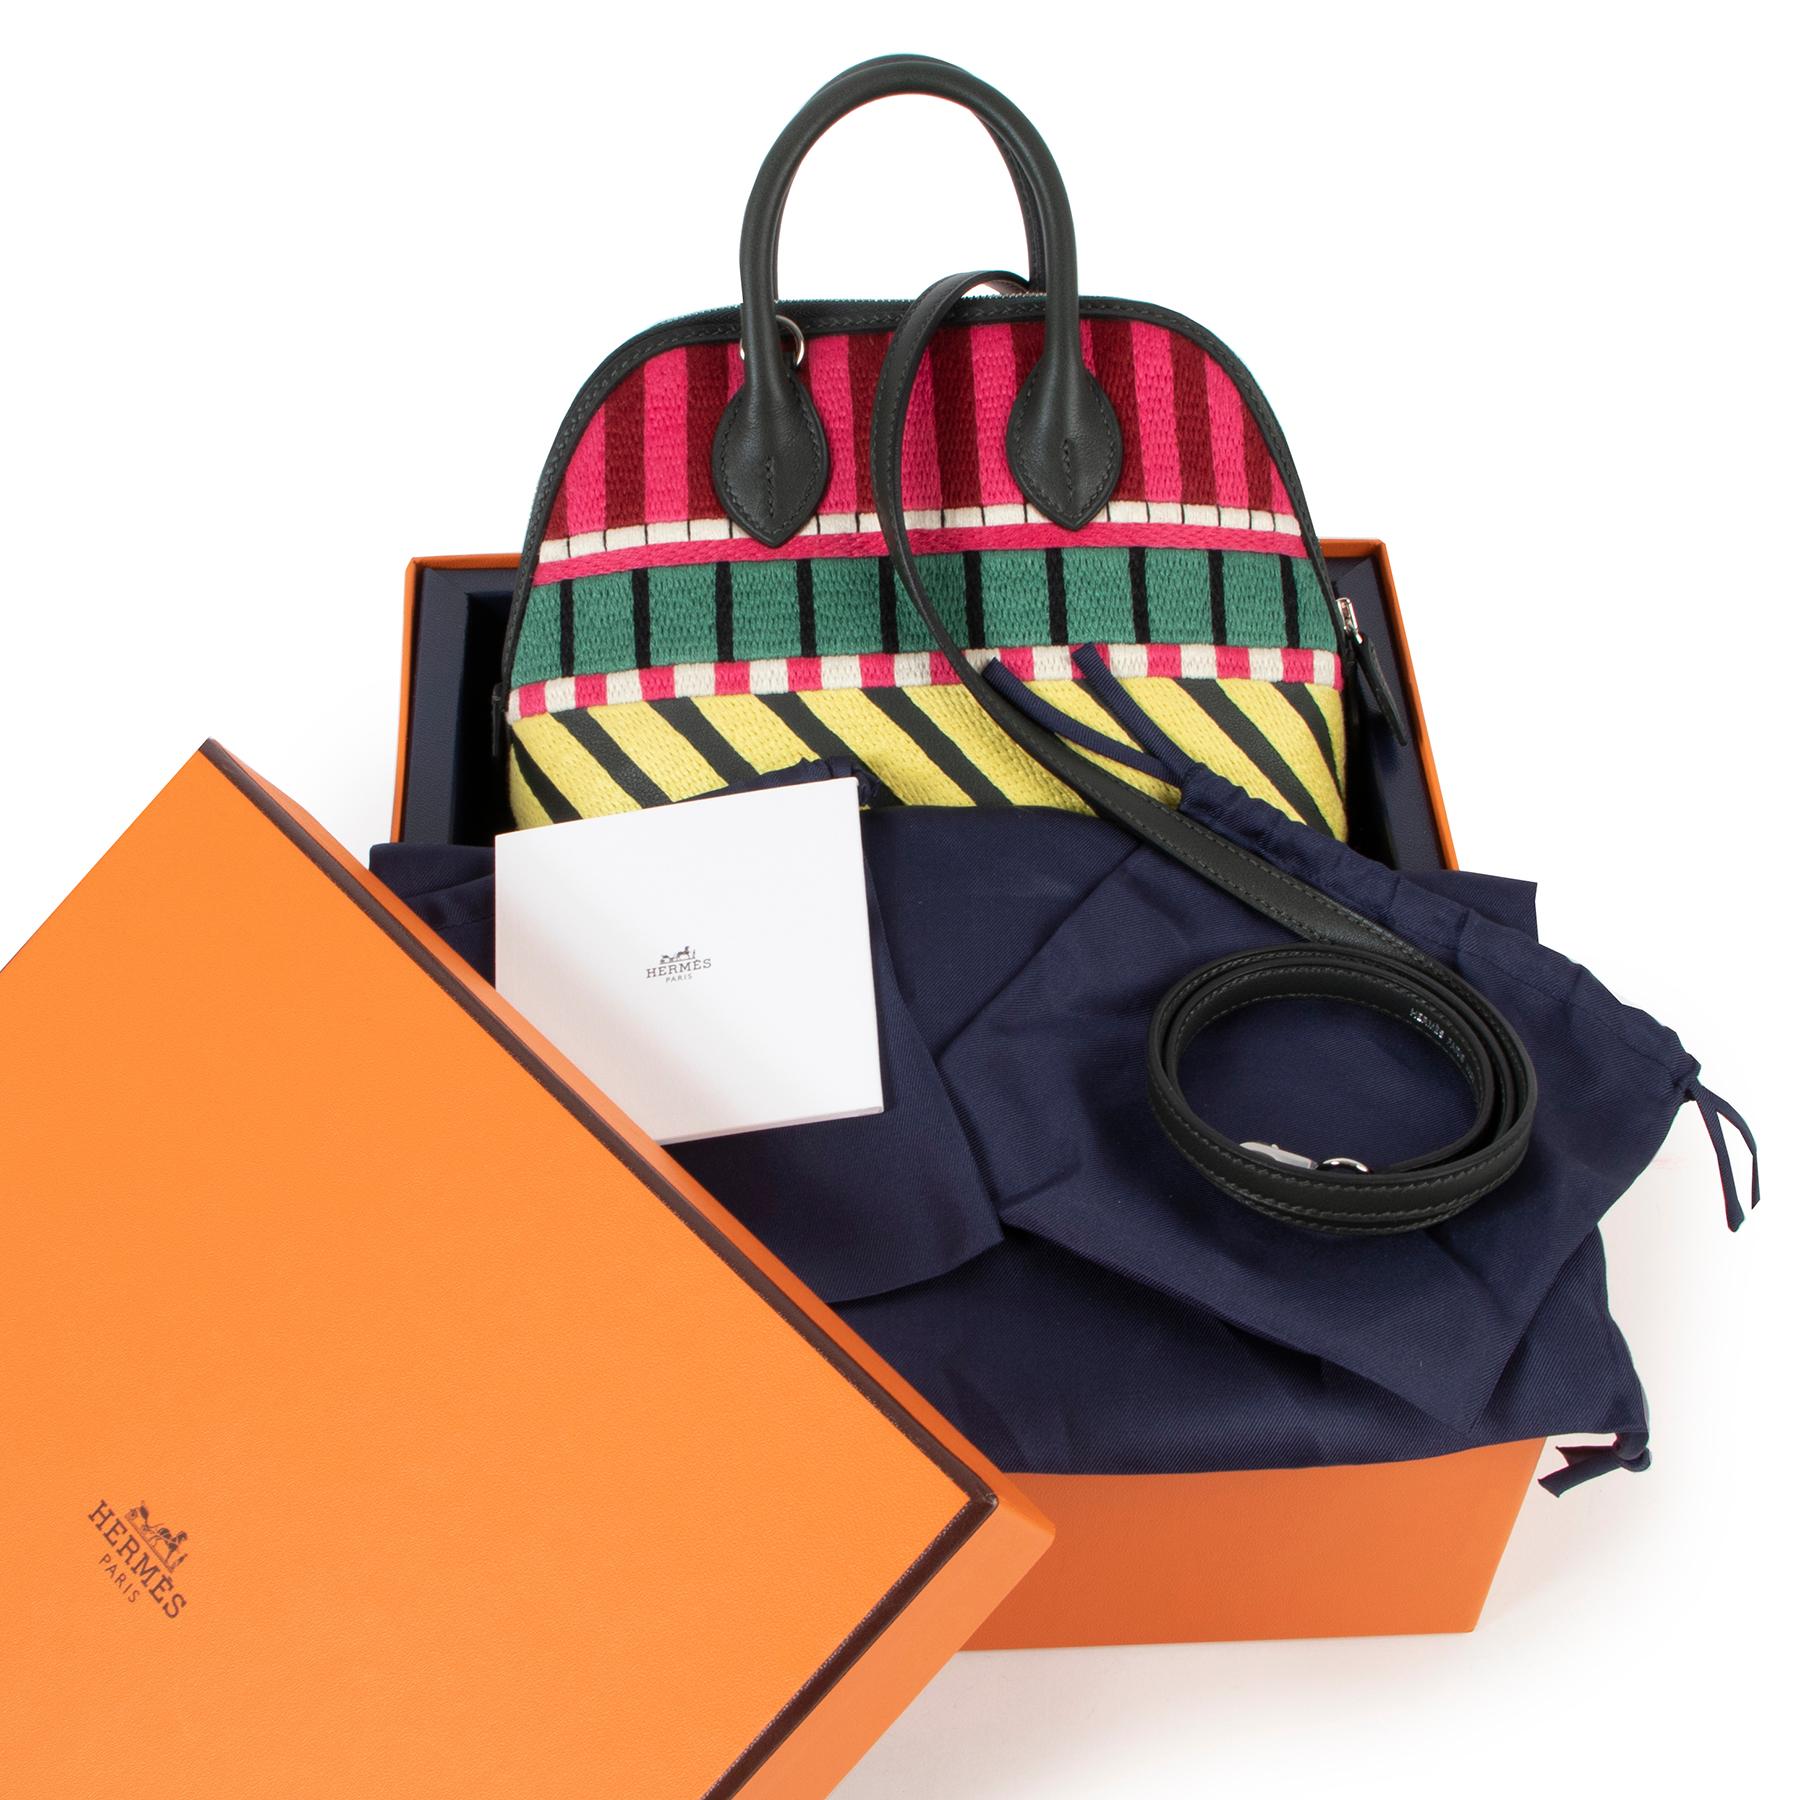 Hermès Mini Bolide Embroidered Dark Green Swift Limited Edition

This extremely rare and highly sought afted Hermès Mini Bolide Embroidered Dark Green Swift is a limited edition release that is so rare to get you hands on. This beauty is crafted out